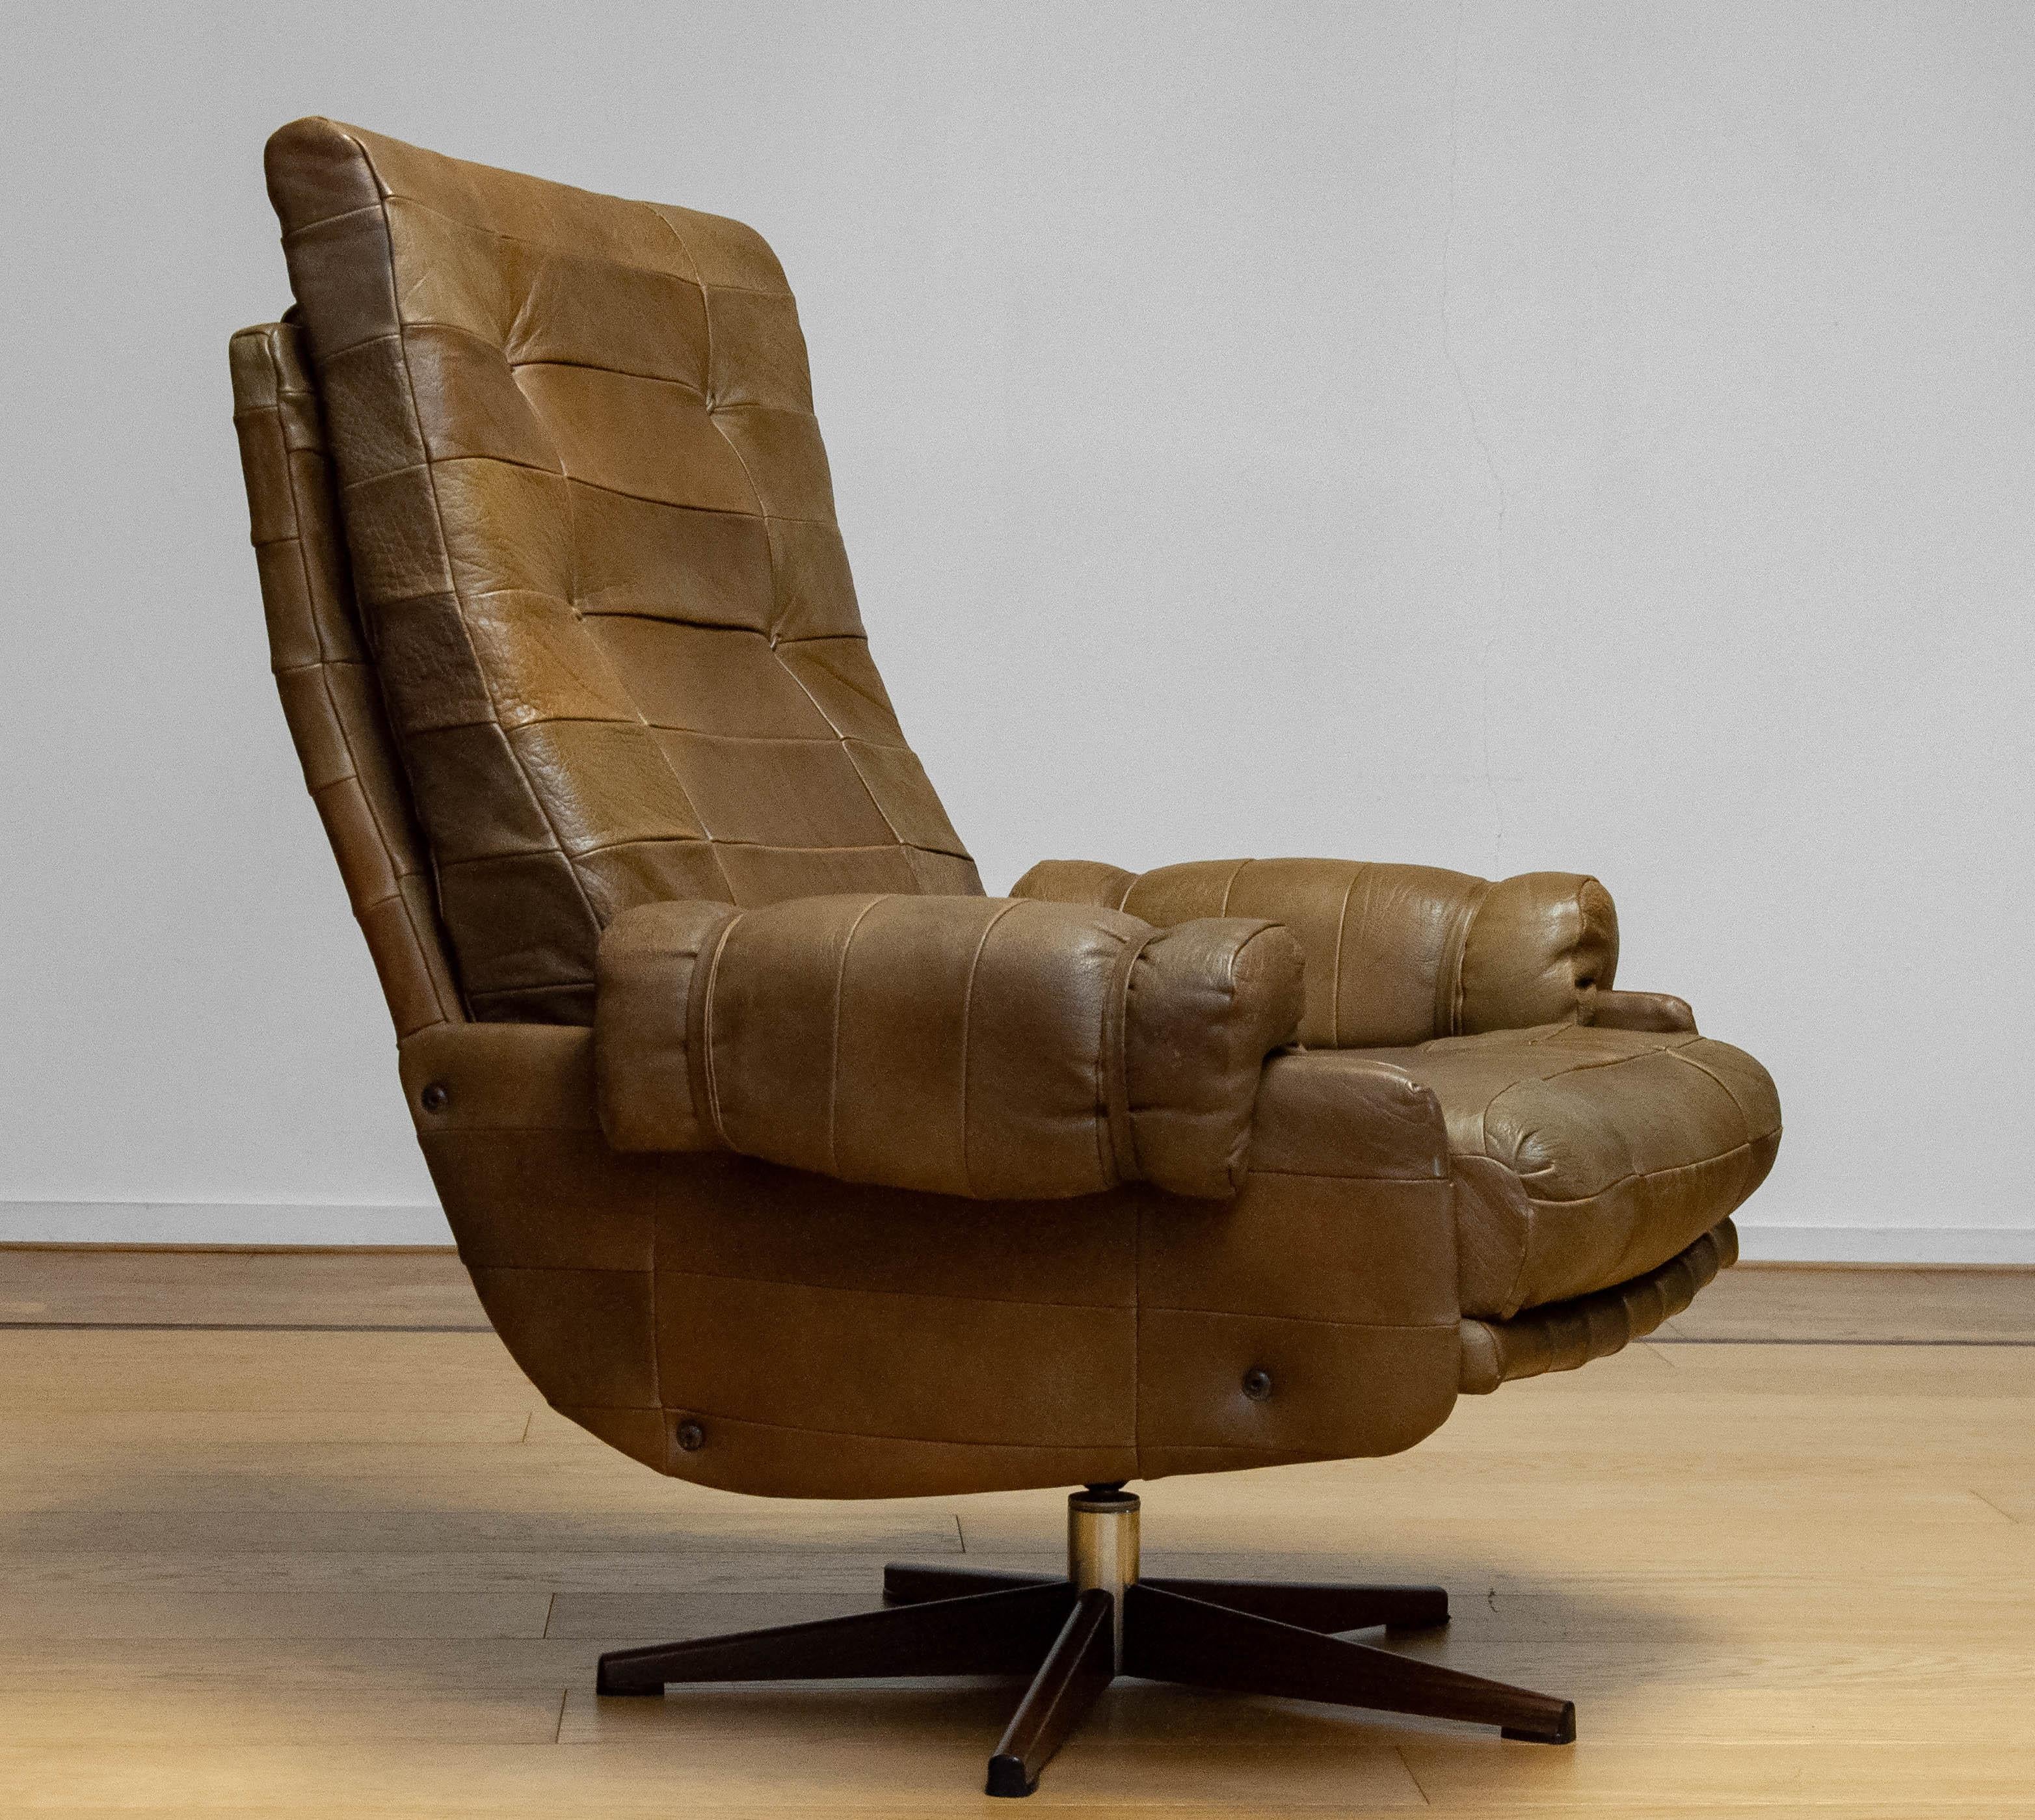 Swedish 70s Swivel Chair By Arne Norell Möbel AB In Sturdy Olive Green Patchwork Leather For Sale